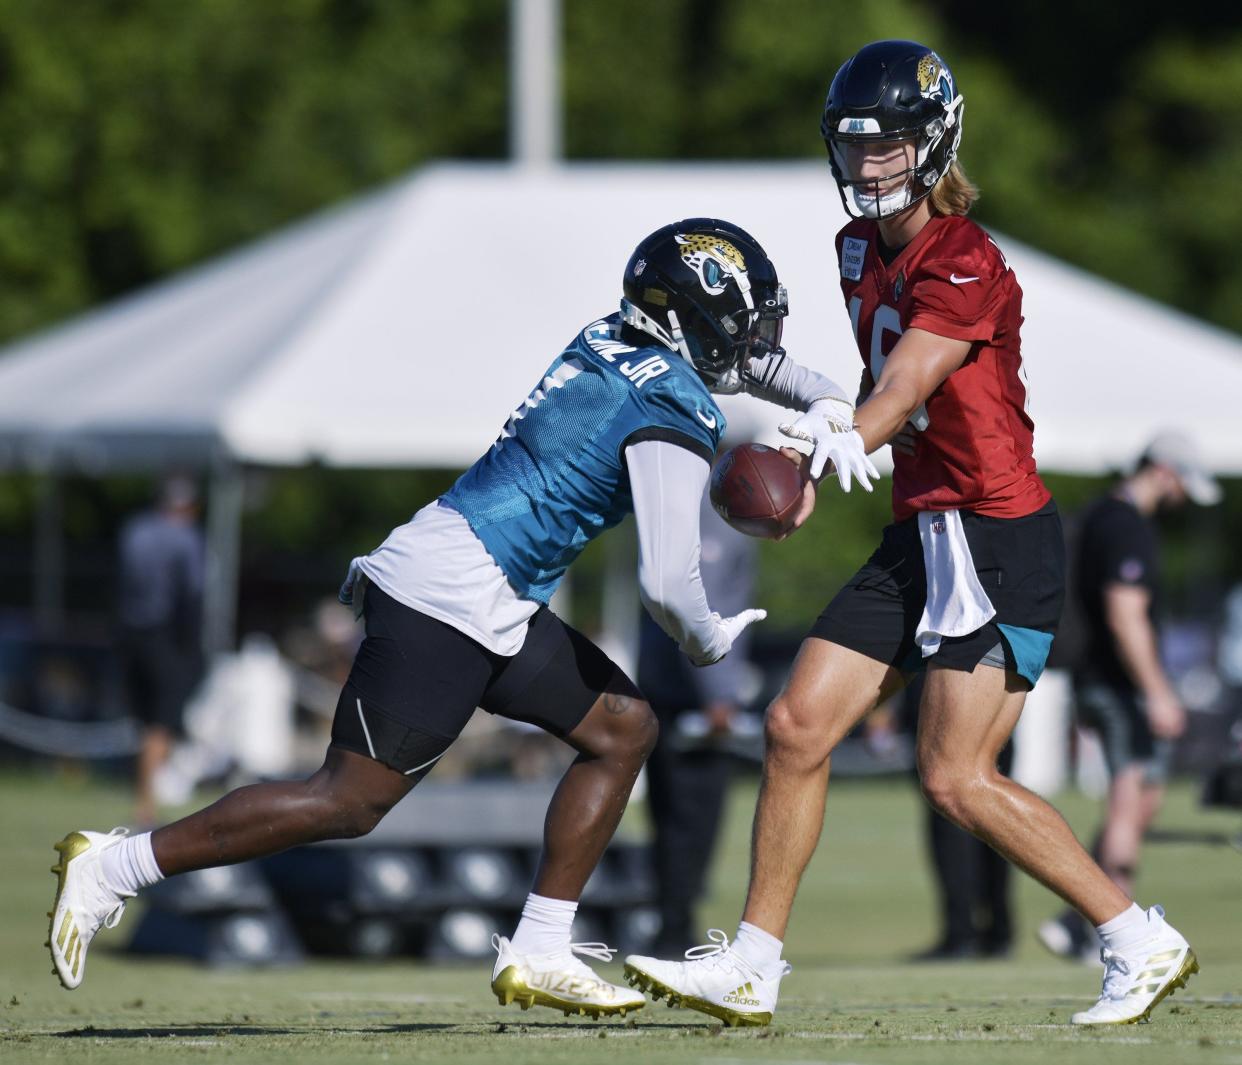 Jaguars quarterback Trevor Lawrence and running back Travis Etienne will start on Friday in a preseason game against Cleveland at 
TIAA Bank Field.